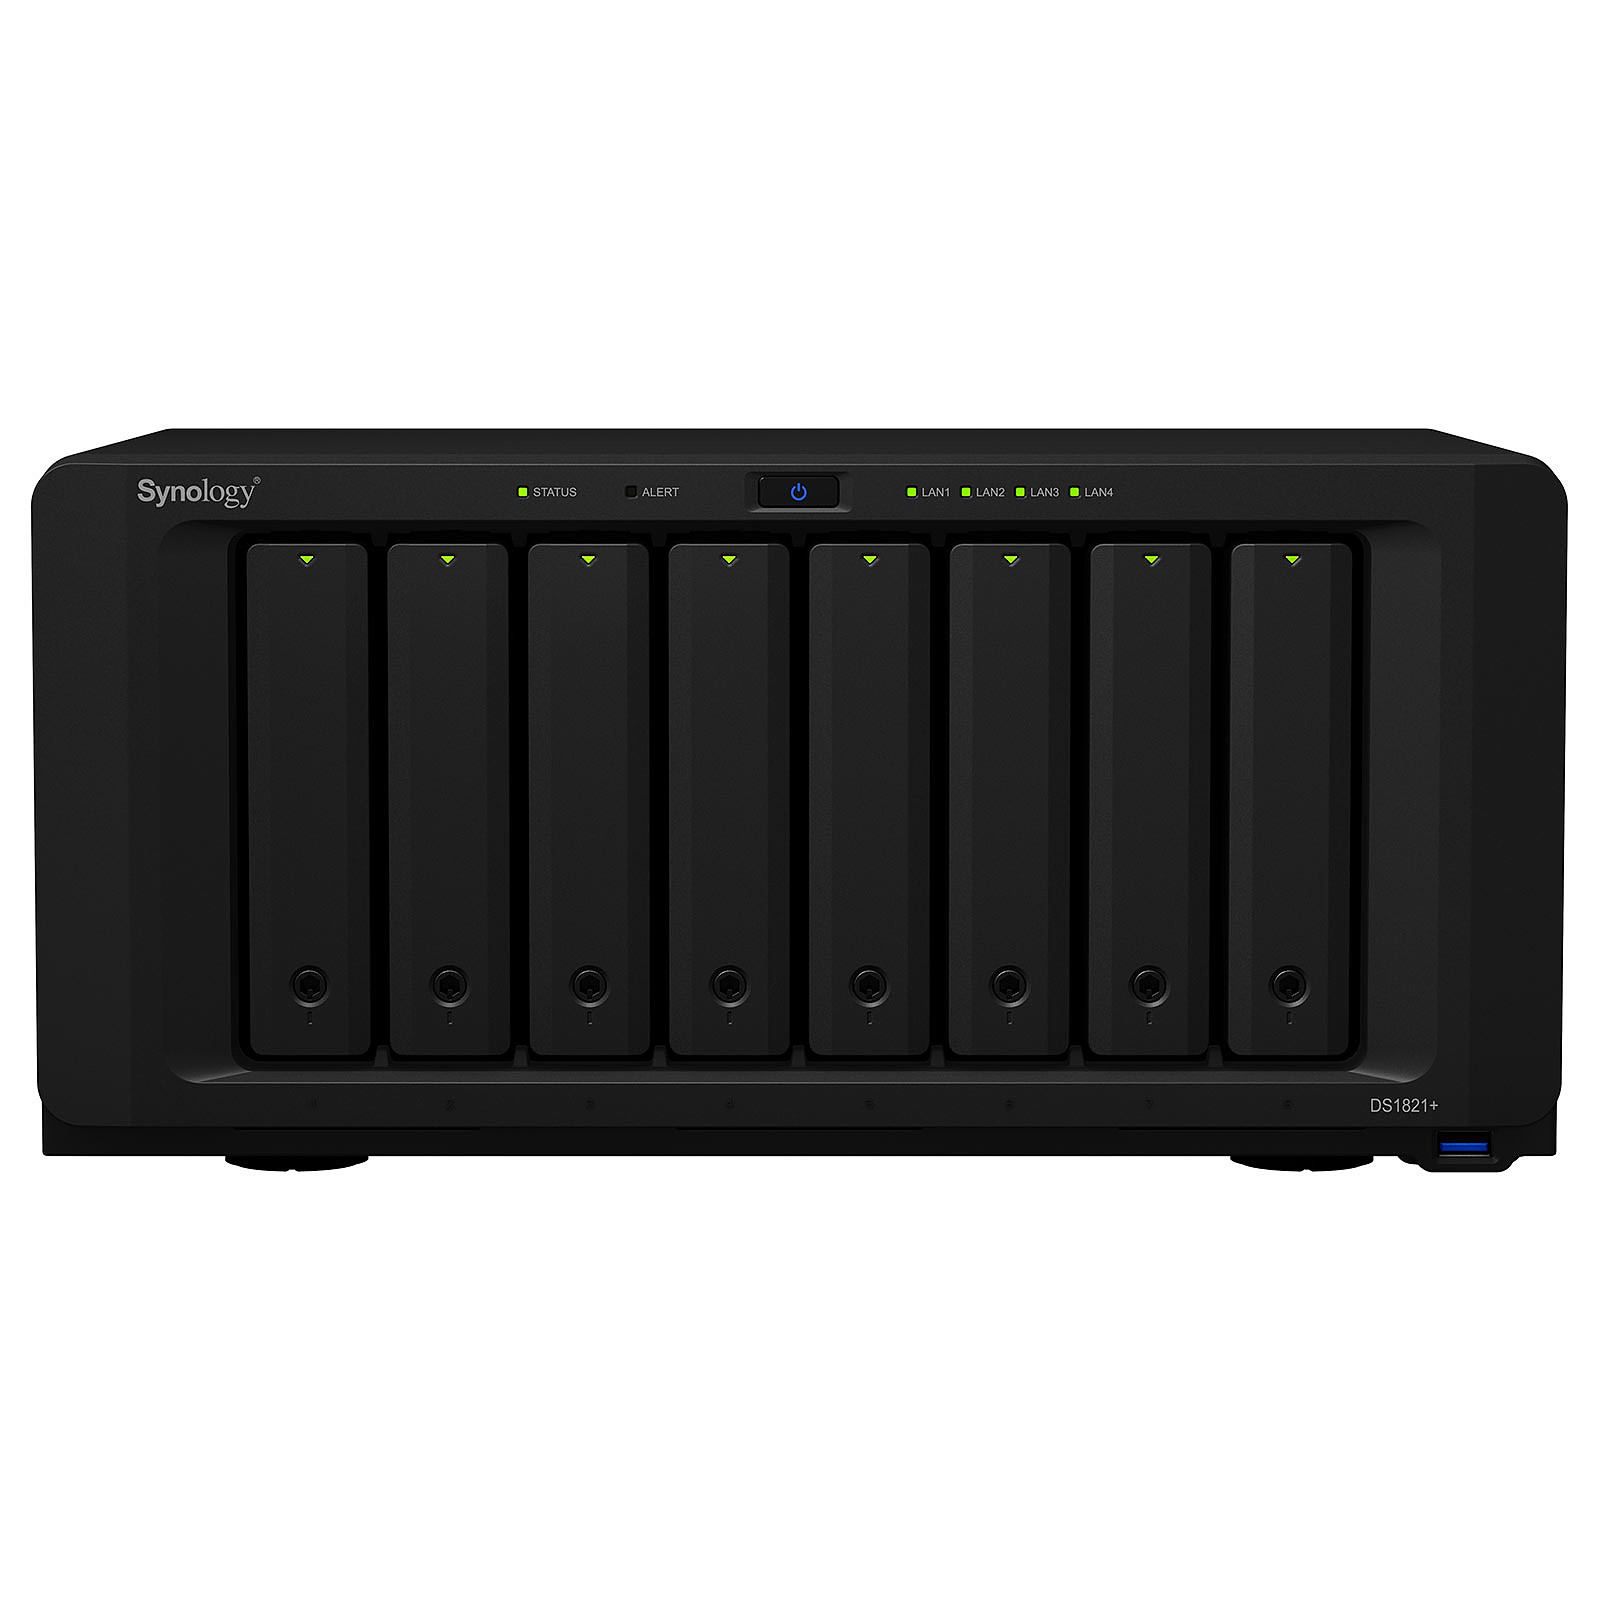 Synology DiskStation DS1821+ - Serveur NAS Synology